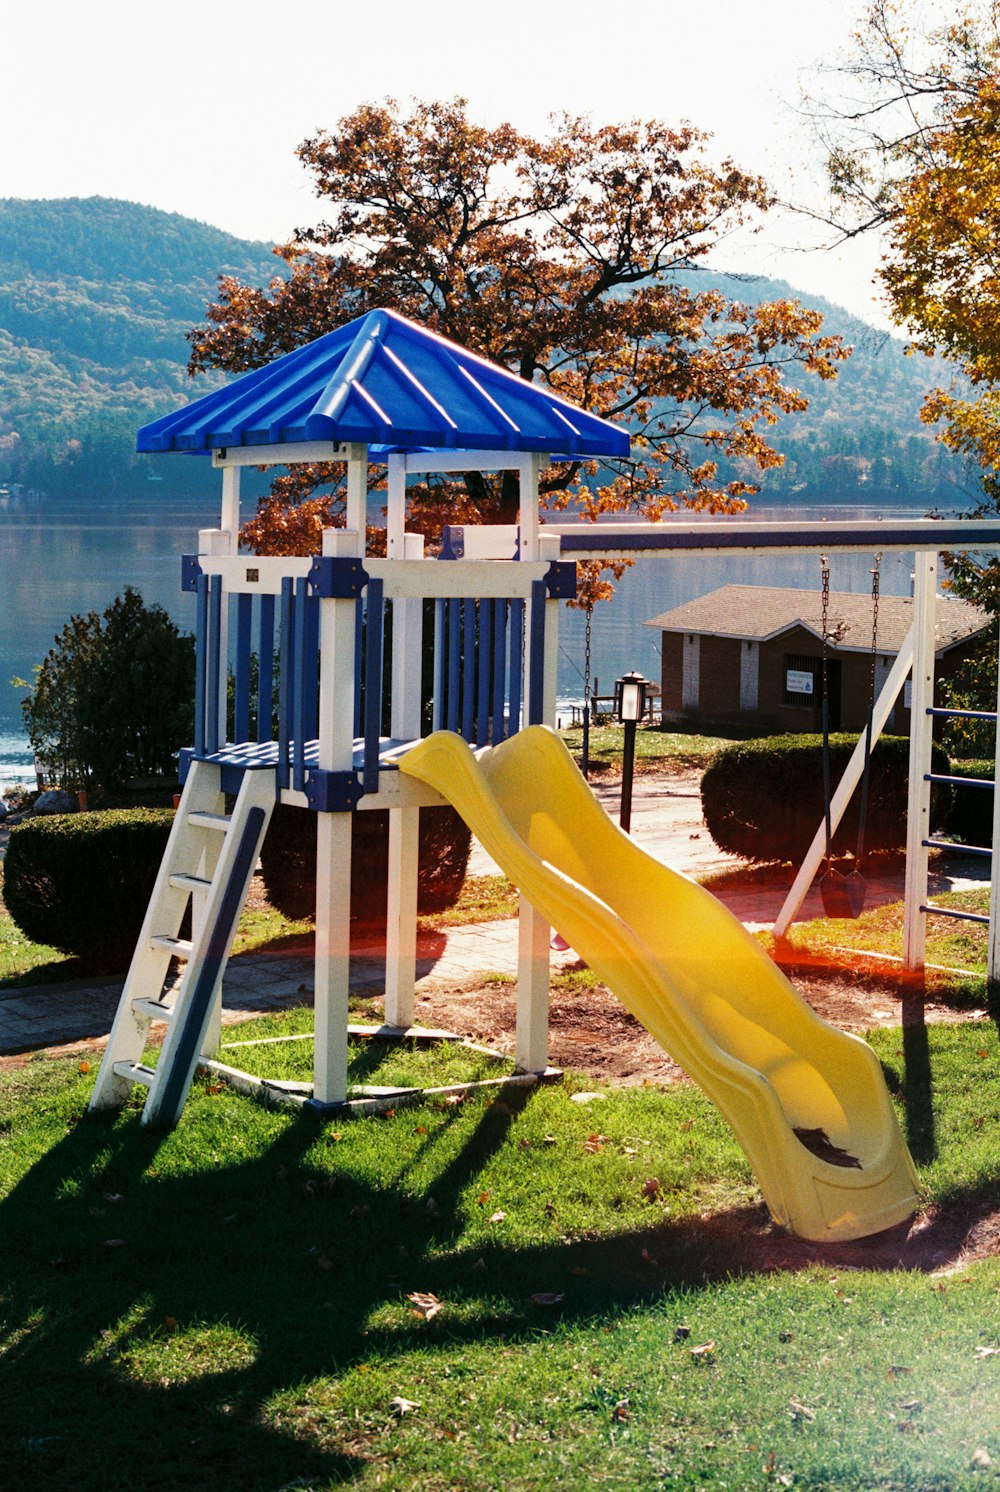 a playground with a yellow slide and a blue umbrella